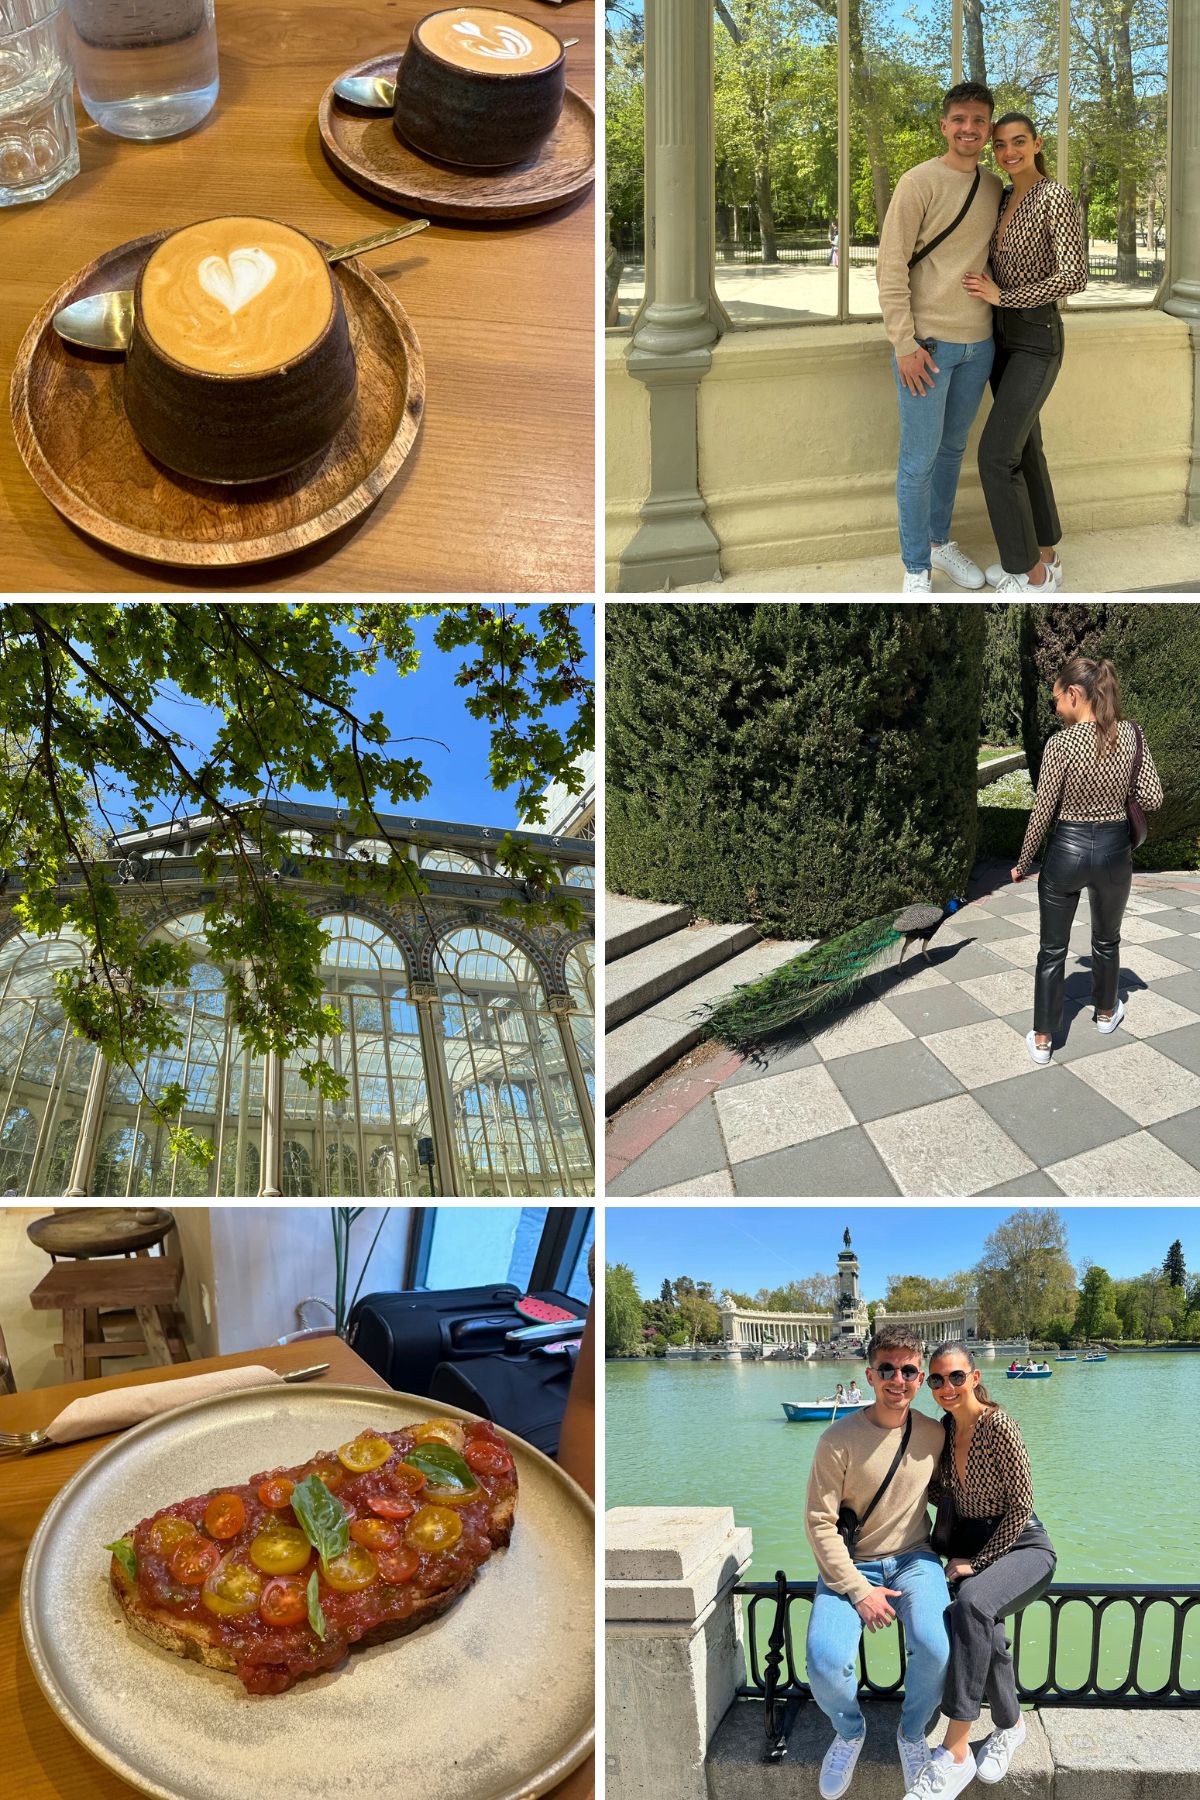 Couple at El Retiro Park and breakfast at Natif Coffee & Kitchen.